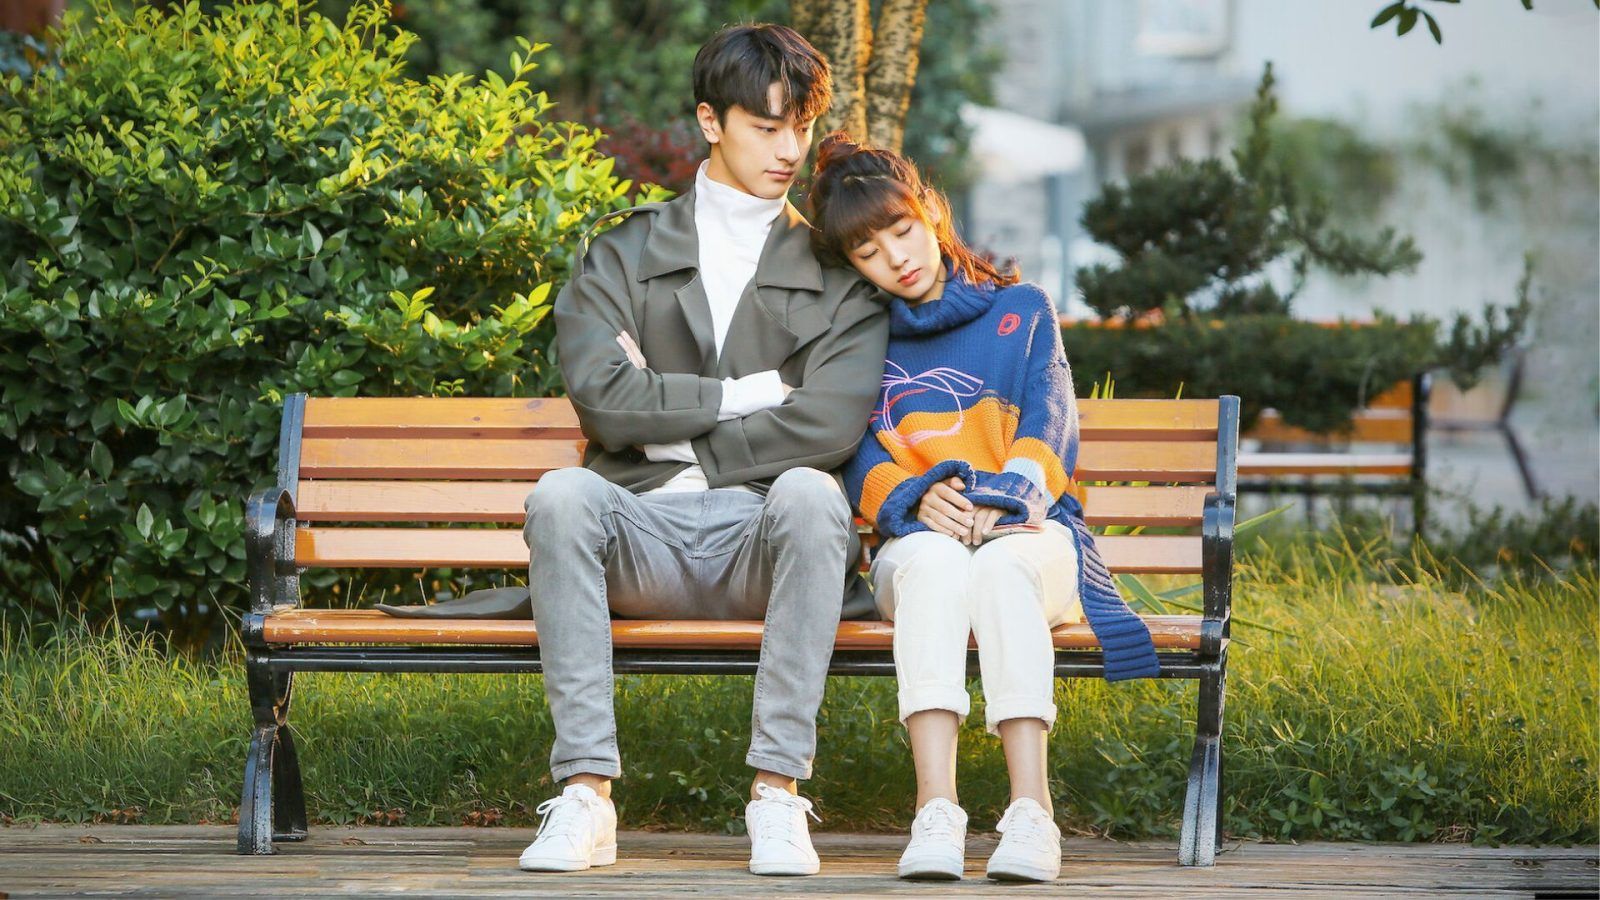 Forever Love: All you need to know about the latest romantic C-drama